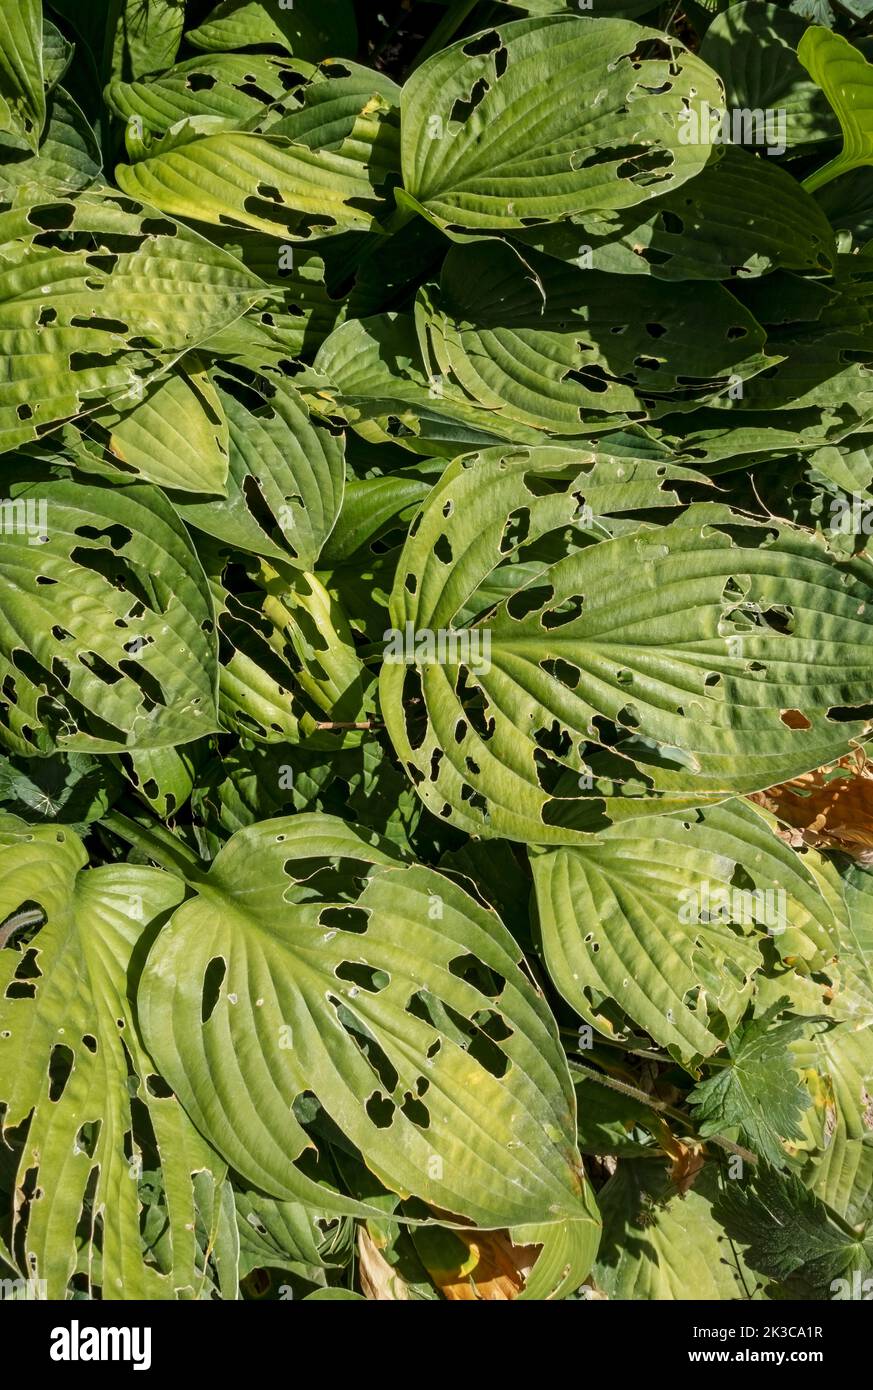 Close up of hosta hostas growing in border with leaves eaten damaged by slugs and snails in summer England UK United Kingdom GB Great Britain Stock Photo